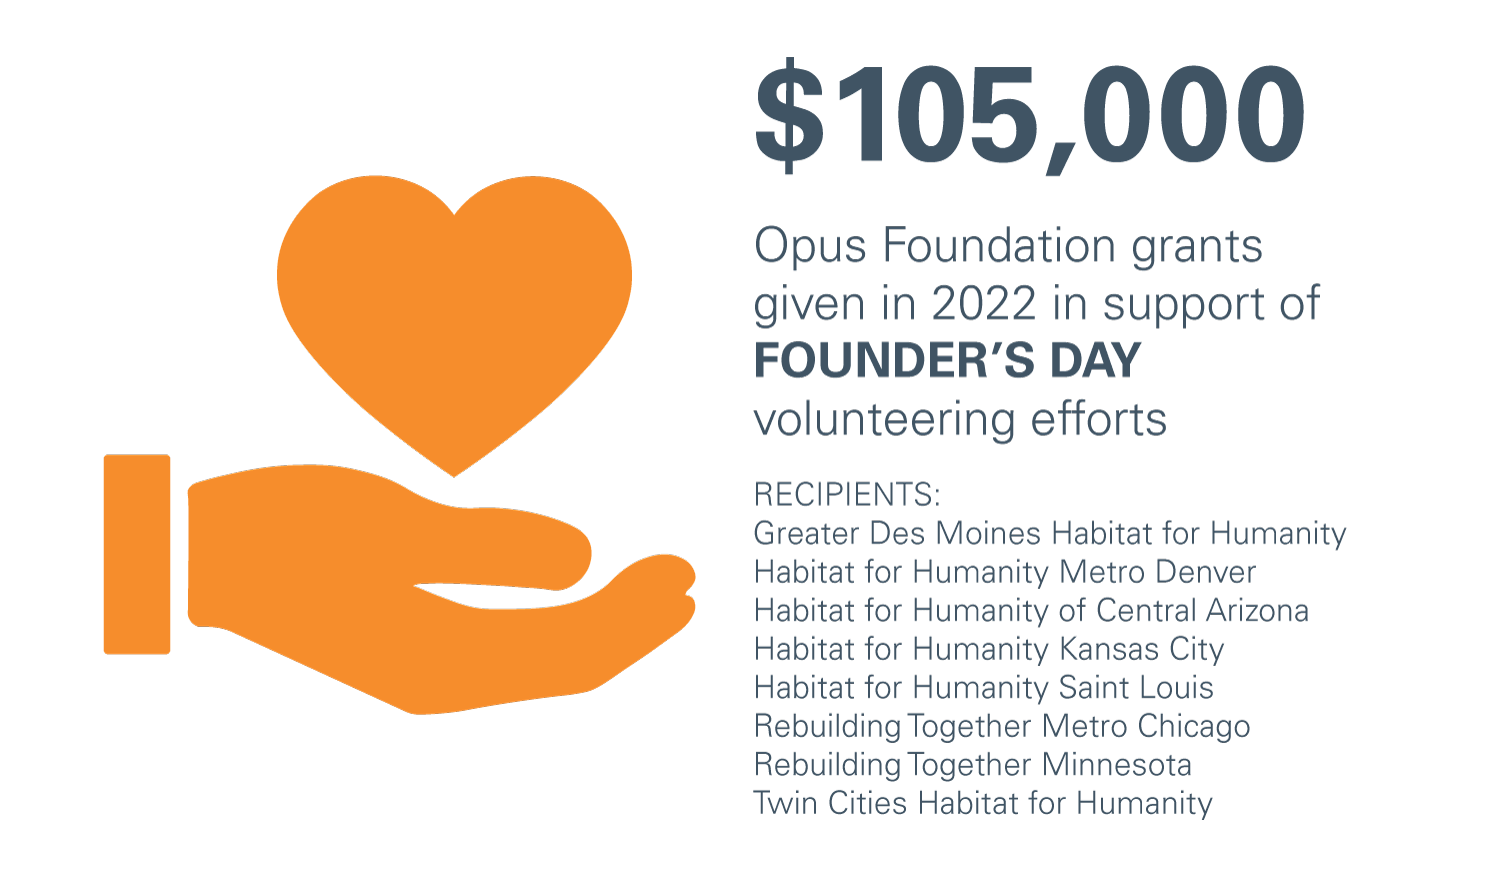 A graphic with a hand holding an illustrated heart and the text $105,000 Opus Foundation grants given in 2022 in support of Founder's Day volunteering efforts.